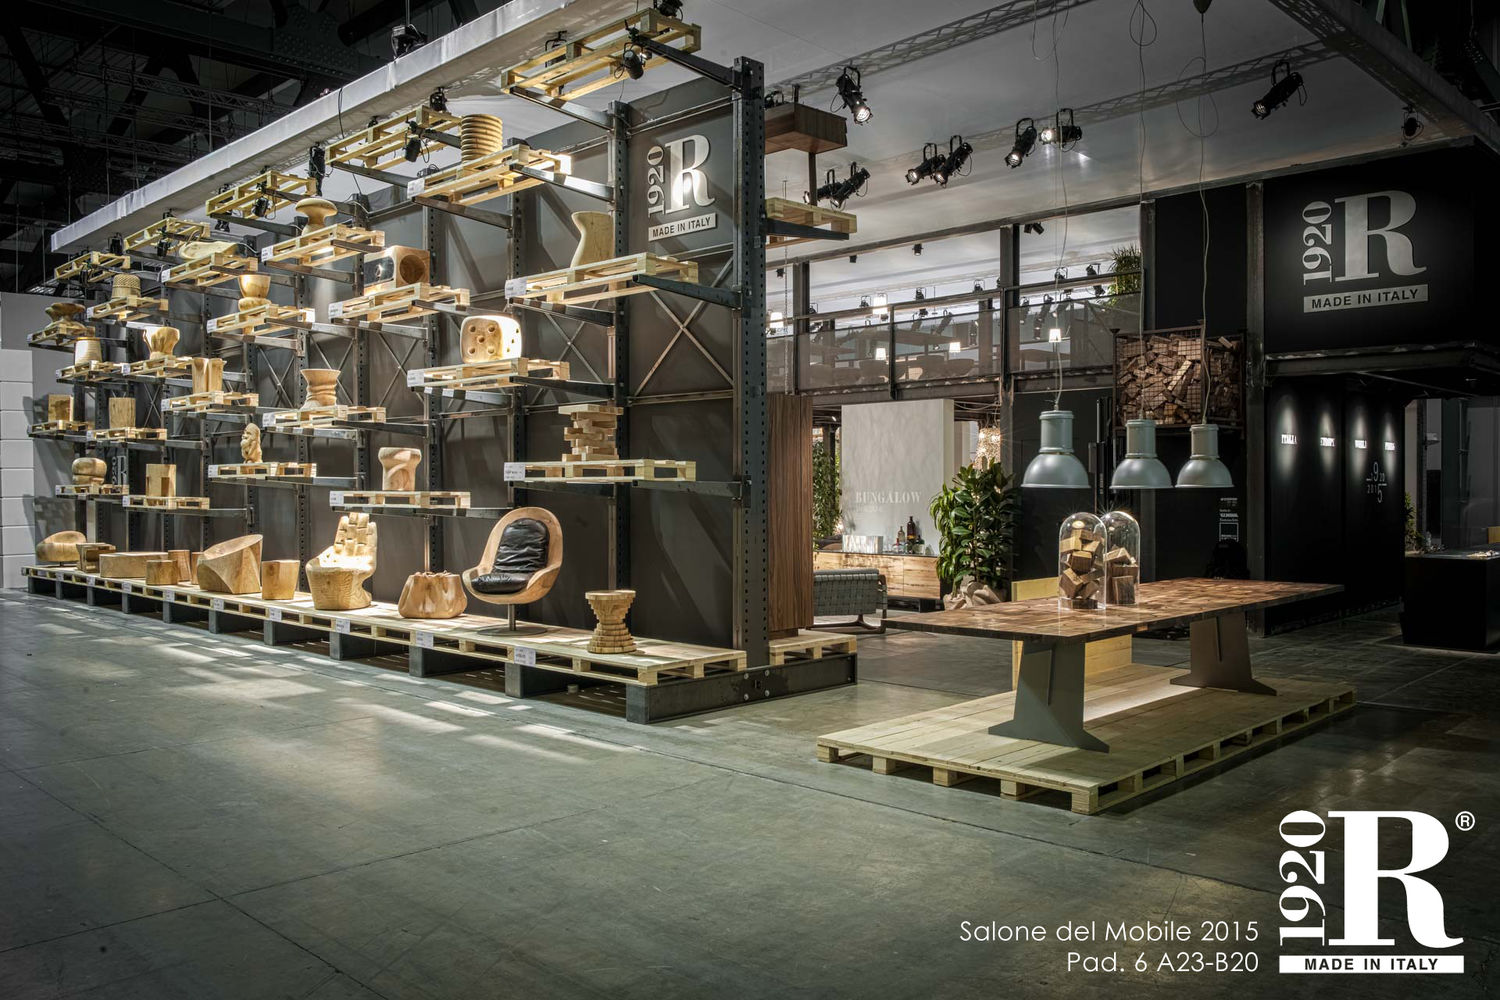 Scm Group celebrates with Riva 1920 its 95 years of success, sponsoring the Milan Furniture Show  (Salone del Mobile 2015)